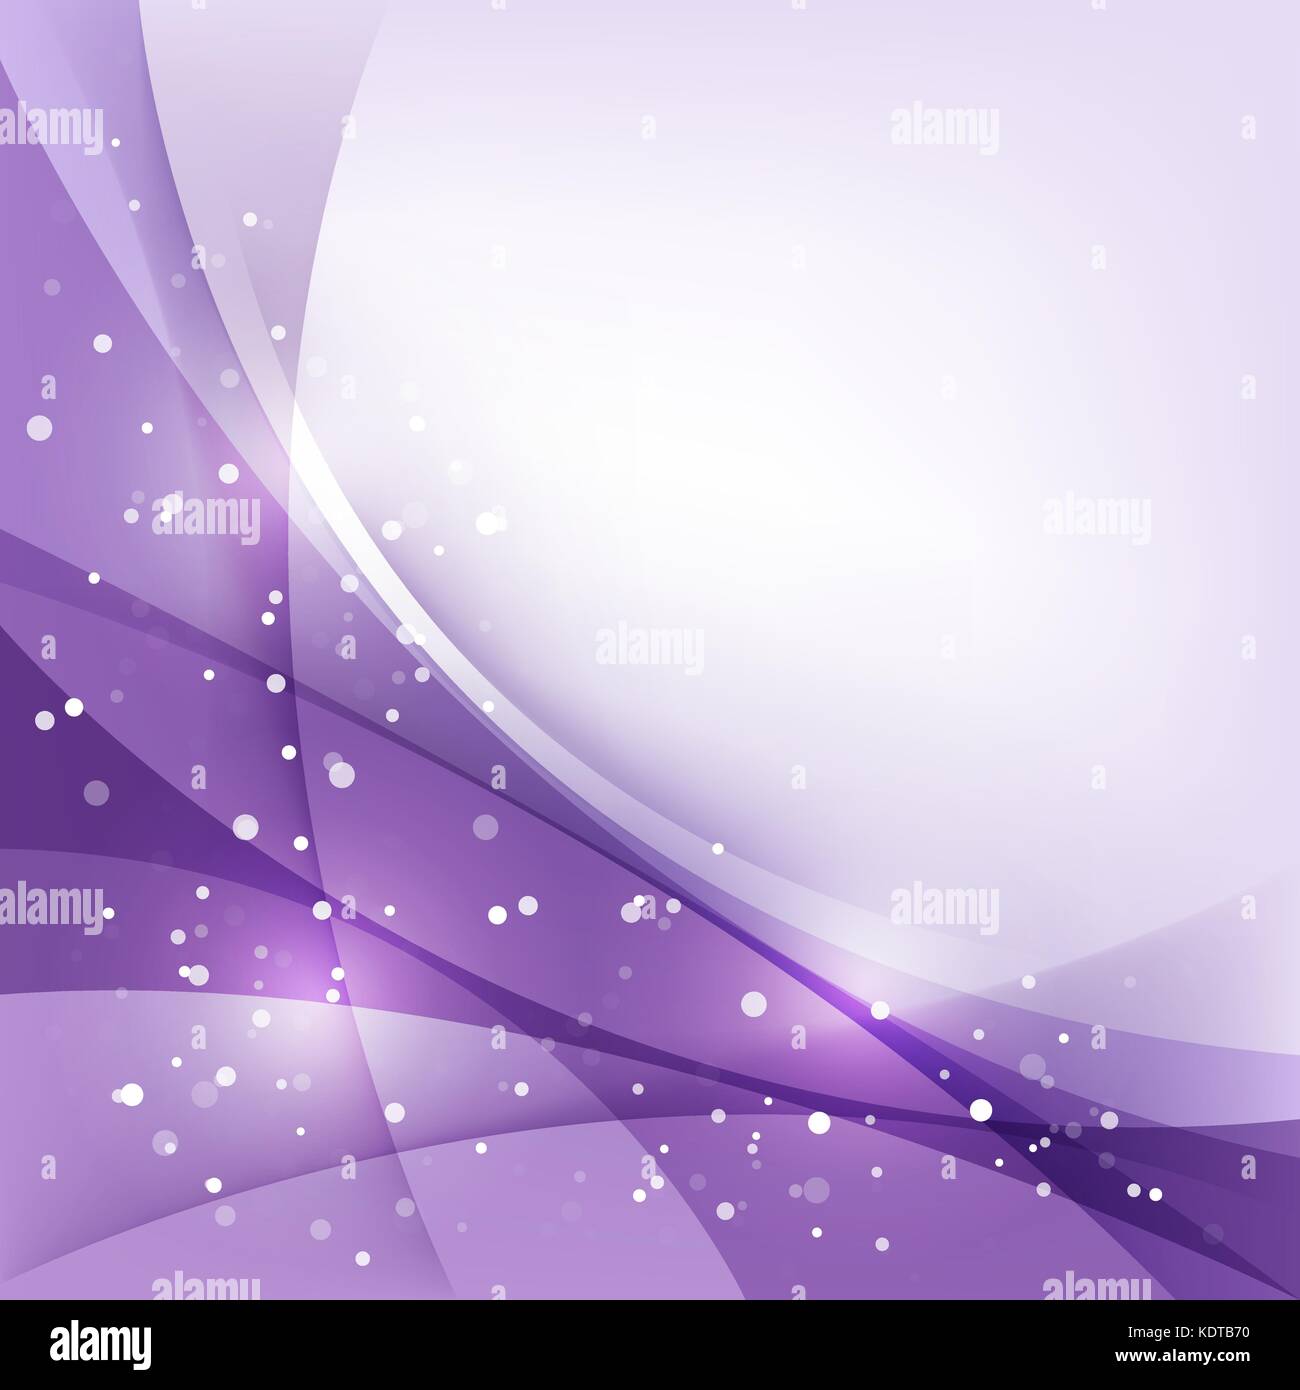 Purple festive Christmas abstract background with curved lines and snow Stock Vector